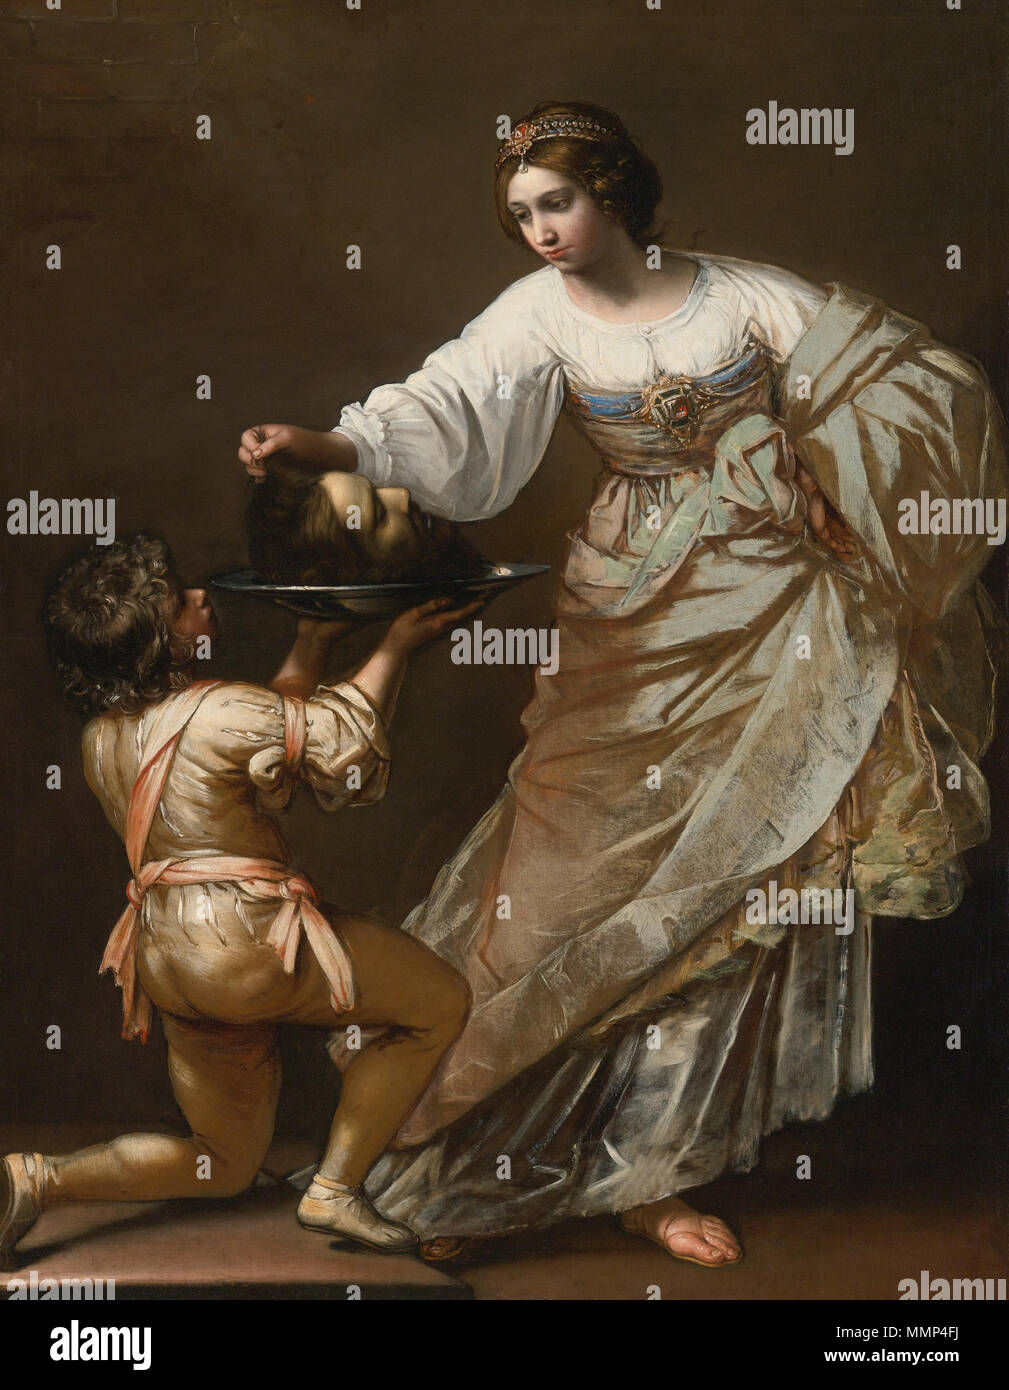 . Salome with the Head of John the Baptist (18th-century copy). Oil on canvas, 170.2 by 132.7 cm  . 18th century.   After Guido Reni  (1575–1642)      Alternative names Guido Rhenus il Guido  Description Italian painter, draughtsman and etcher  Date of birth/death 14 November 1575 18 August 1642  Location of birth/death Calvenzano Bologna  Work location Bologna (1599-1600), Rome (1600-1602), Bologna (1603-1605), Rome (1605-1610), Bologna (1611-1612), Rome (1612), Bologna (1615-1616), Mantua (1617-1621), Rome (1622-1629), Naples (1624-1626, 1640-1642)  Authority control  : Q109061 VIAF:?4928829 Stock Photo